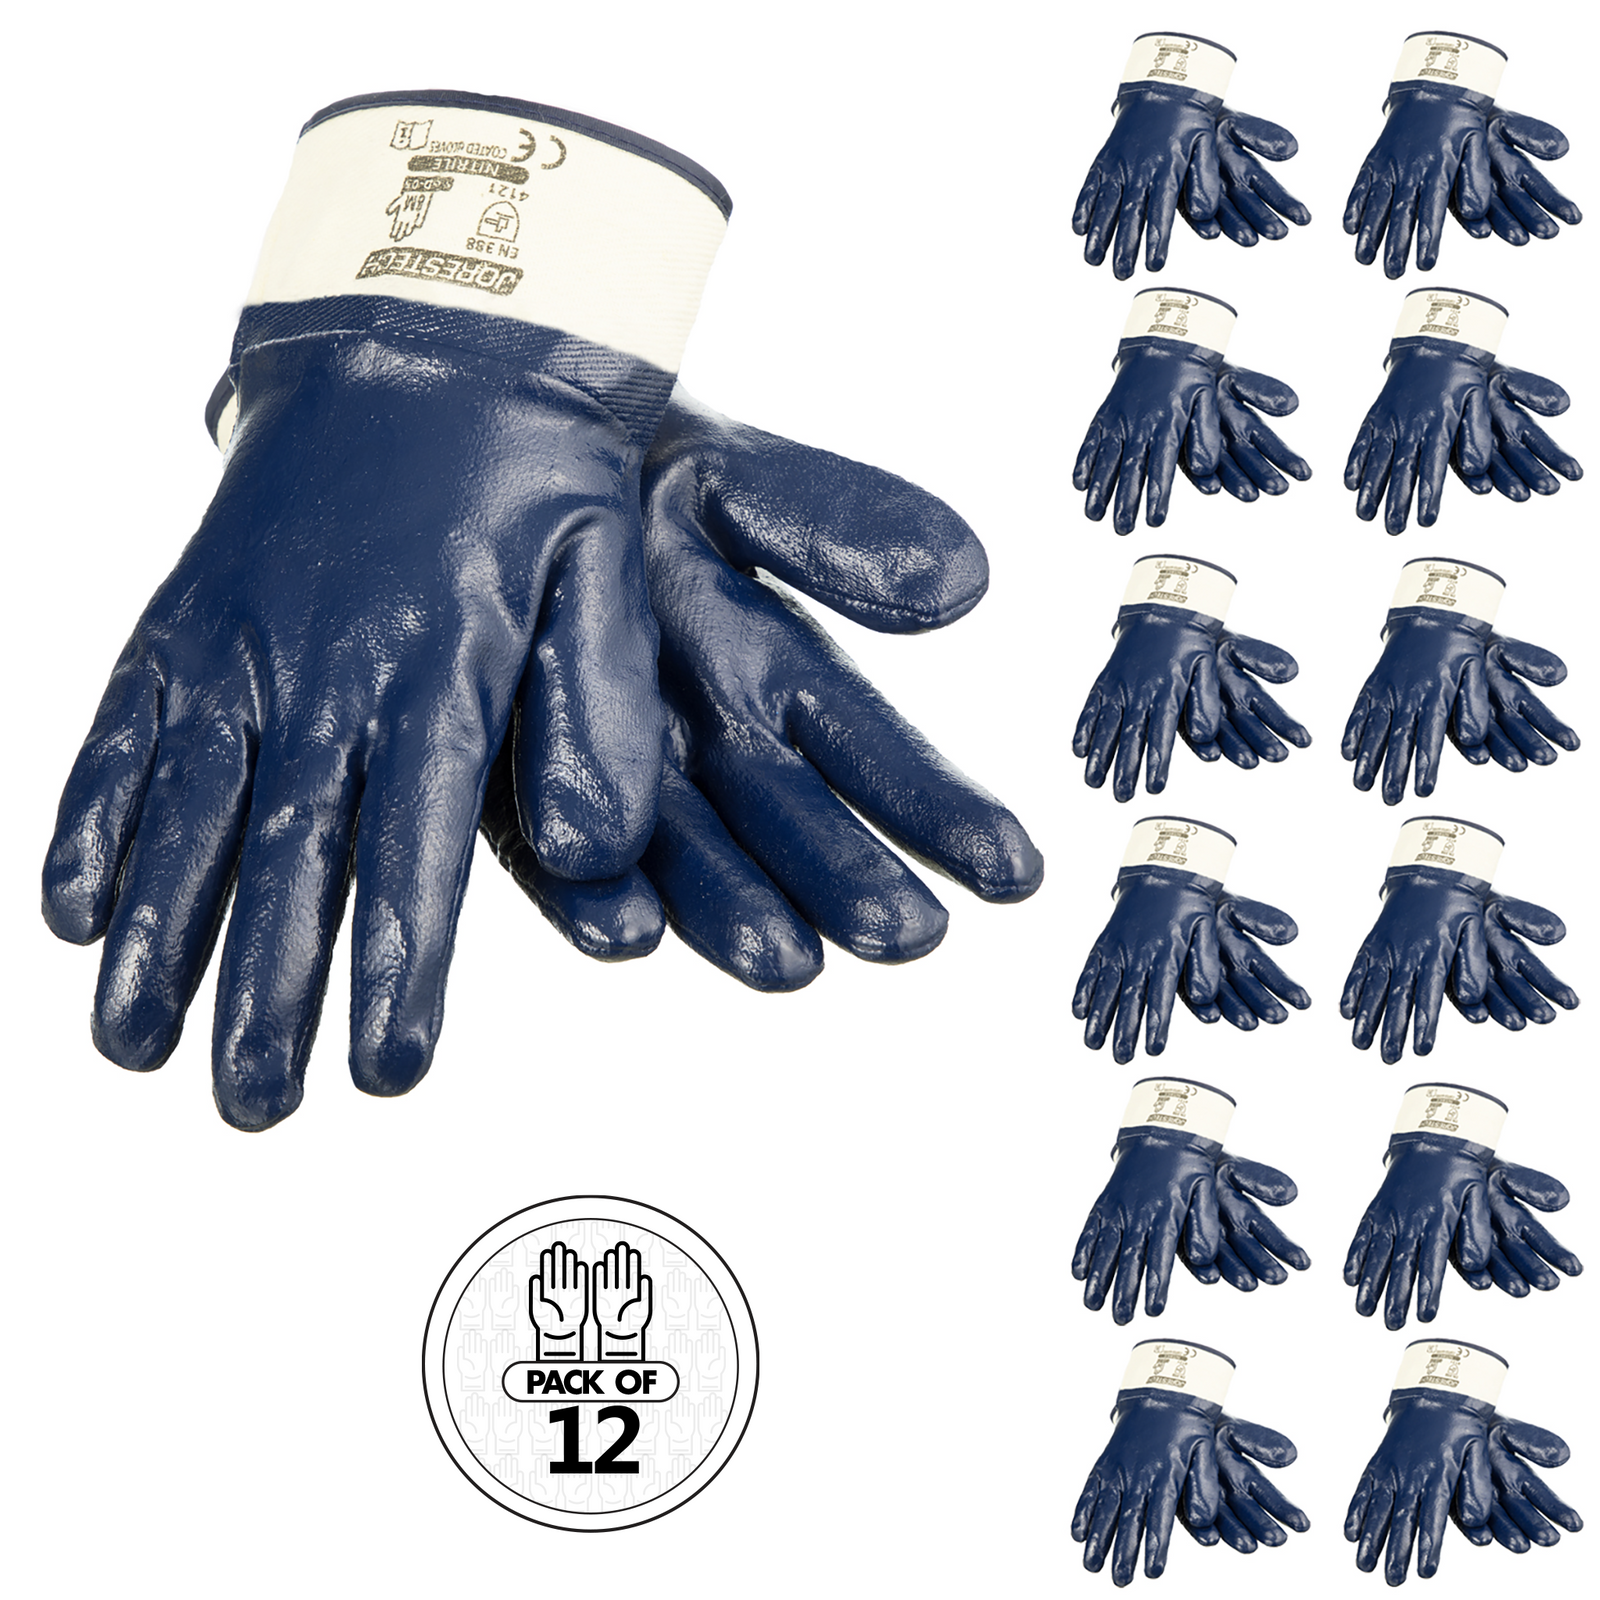 JORESTECH Fully Dipped Nitrile Coated Knit Work Gloves